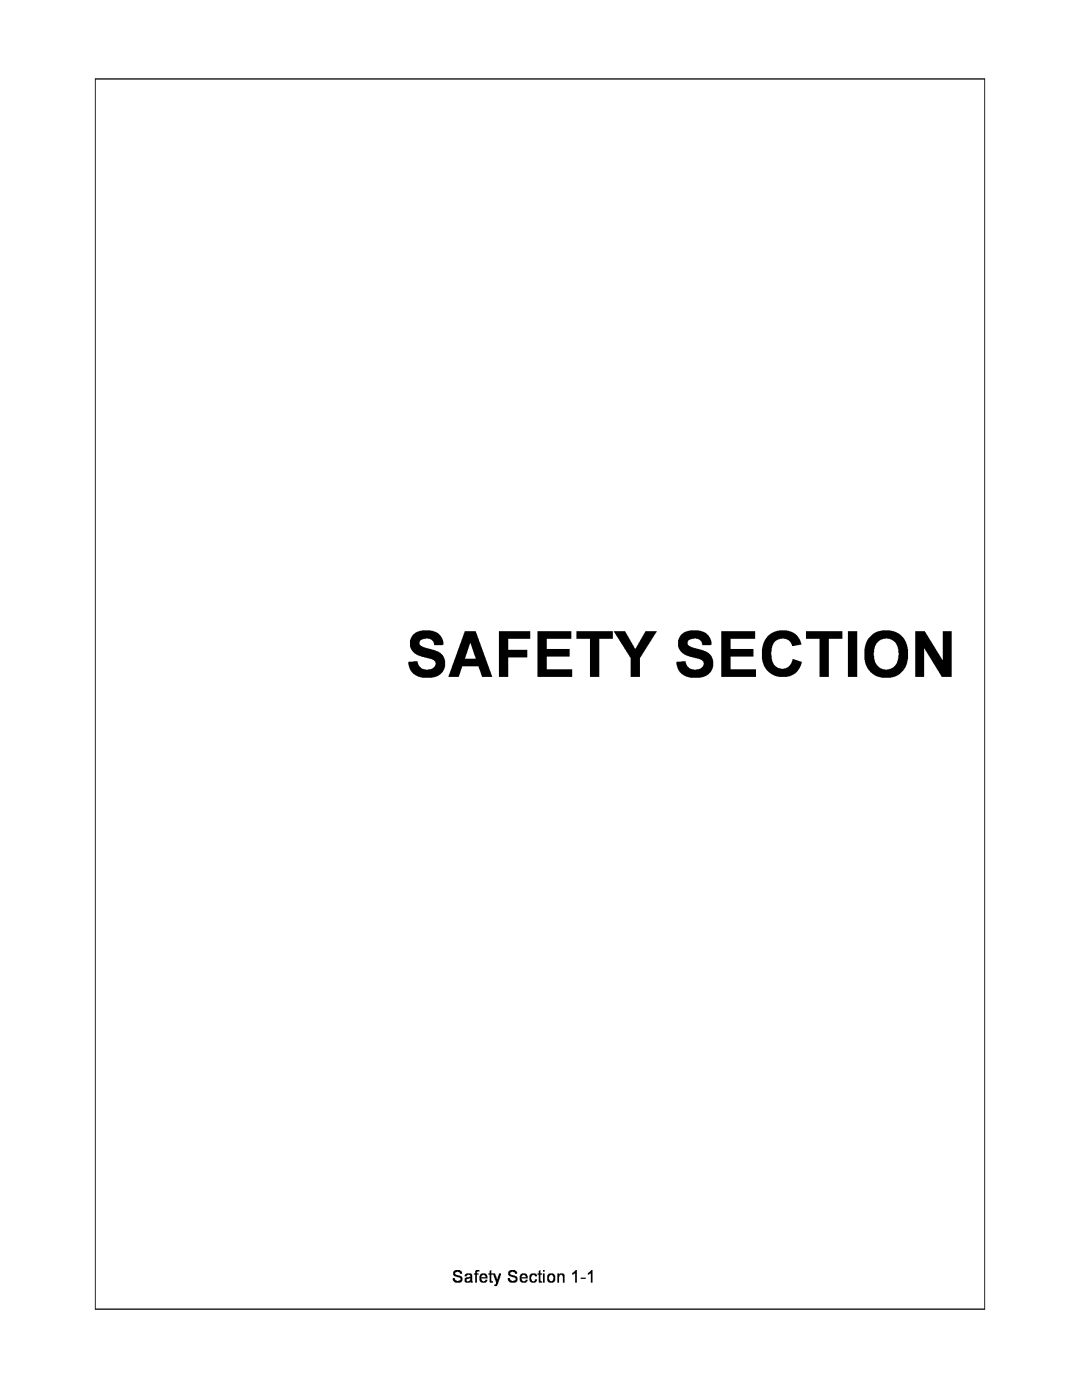 Rhino Mounts 1594 manual Safety Section 